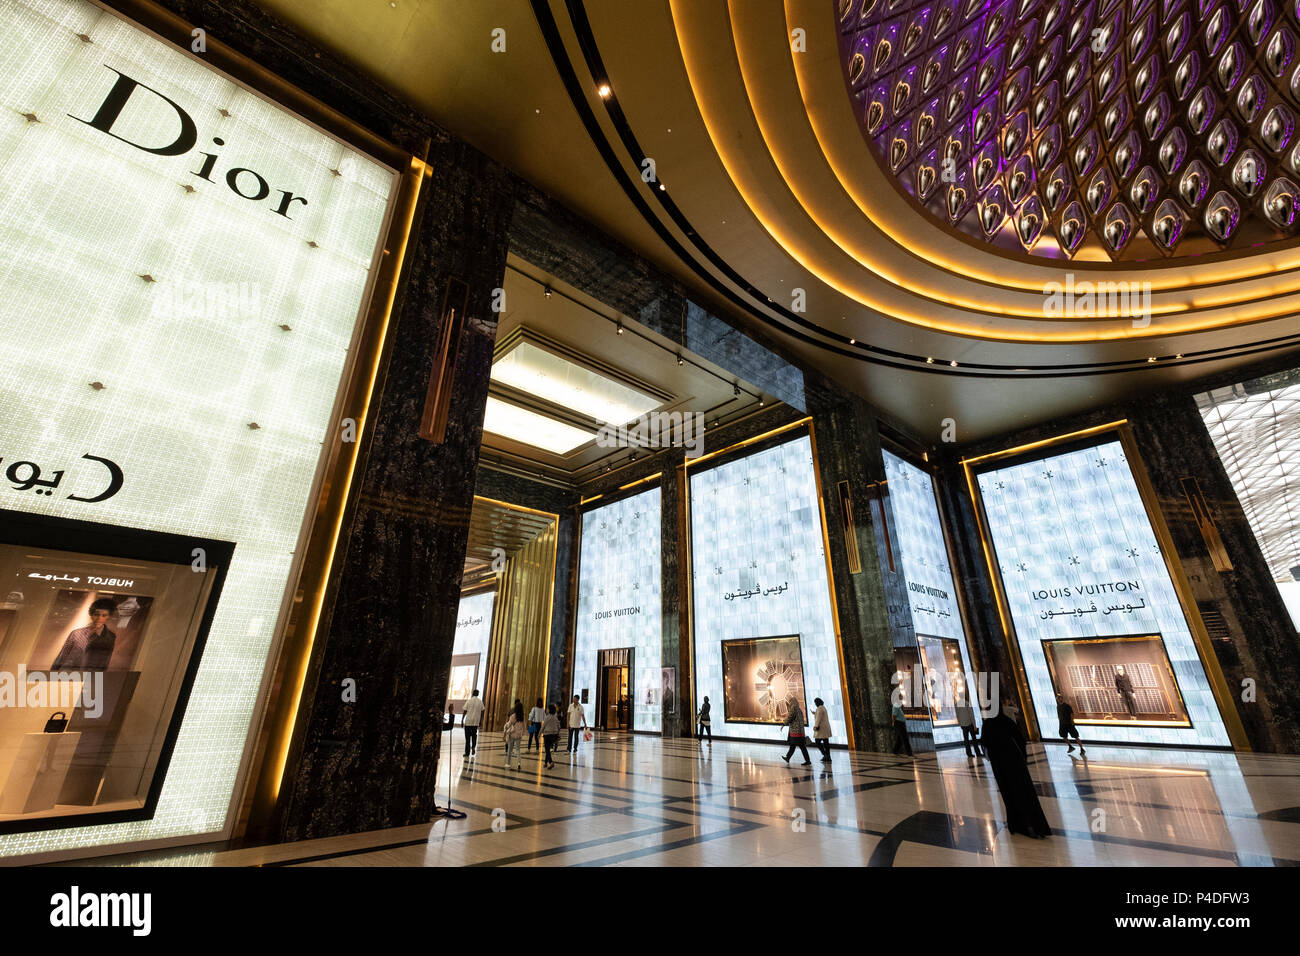 Louis Vuitton ornate display at The Avenues shopping mall in Kuwait City,  Kuwait Stock Photo - Alamy